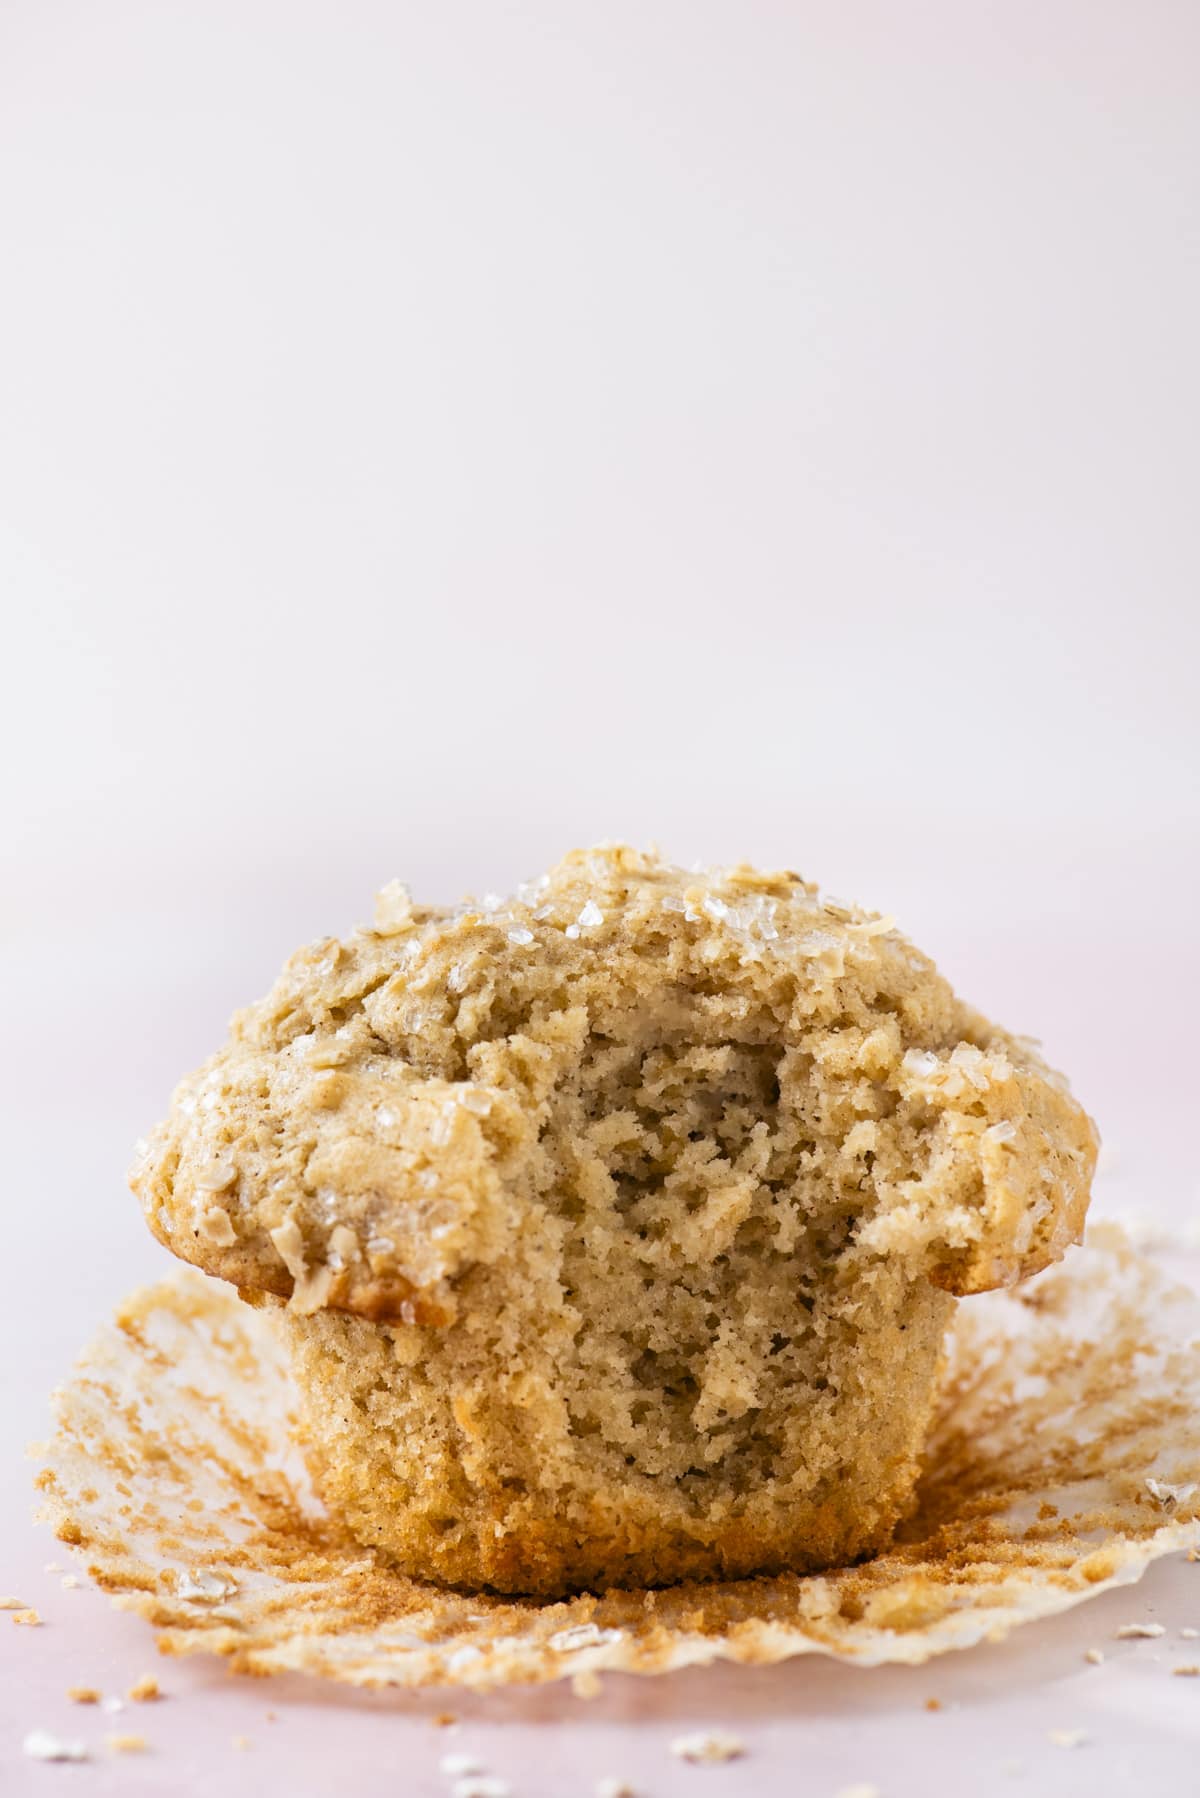 an oatmeal muffin with the muffin liner peeled away and a bite taken out